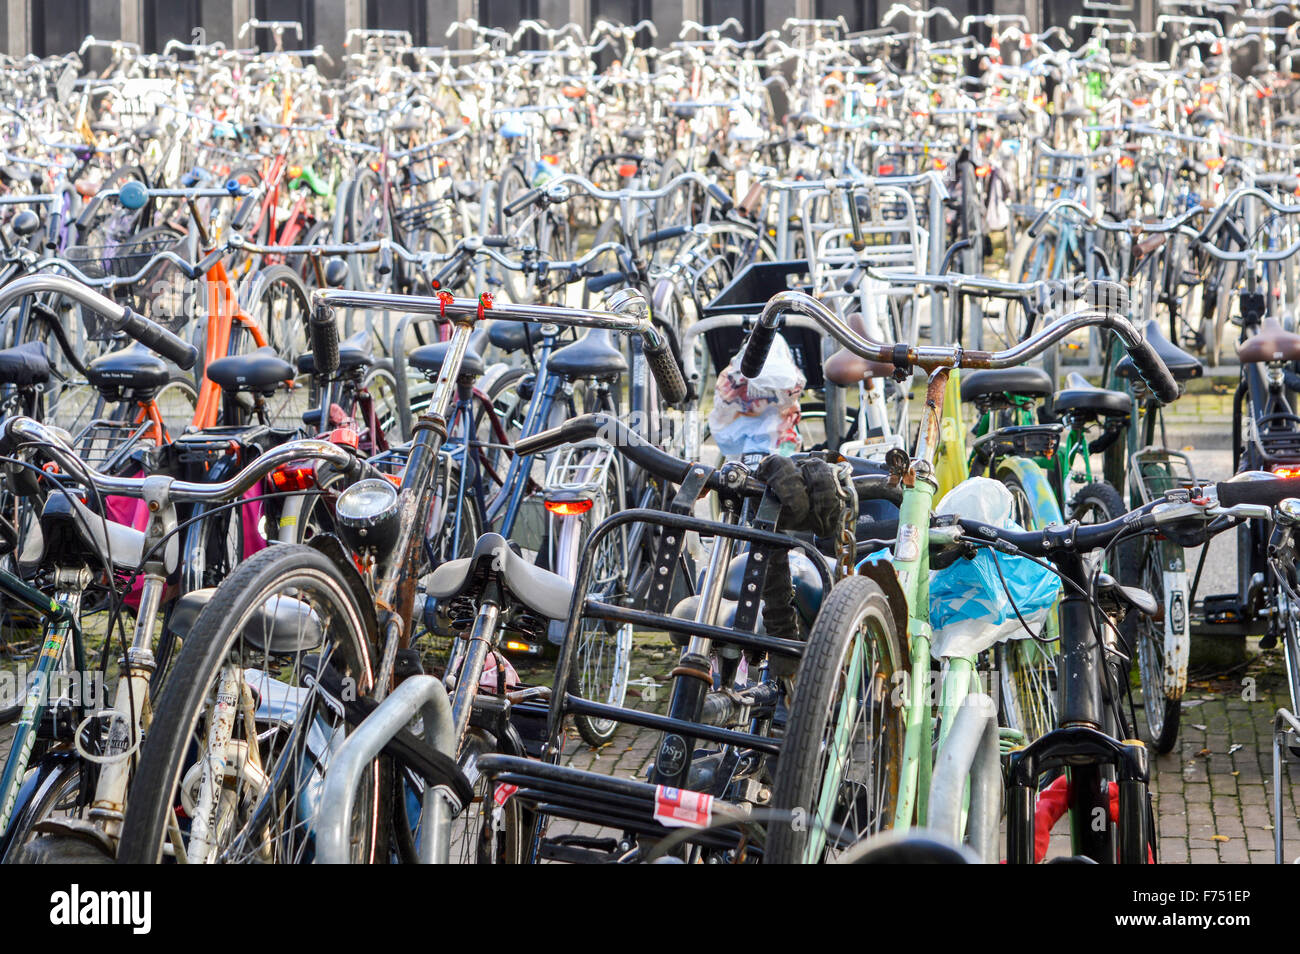 Bicycle parking organized chaos in Amsterdam, Netherlands, Europe Stock Photo